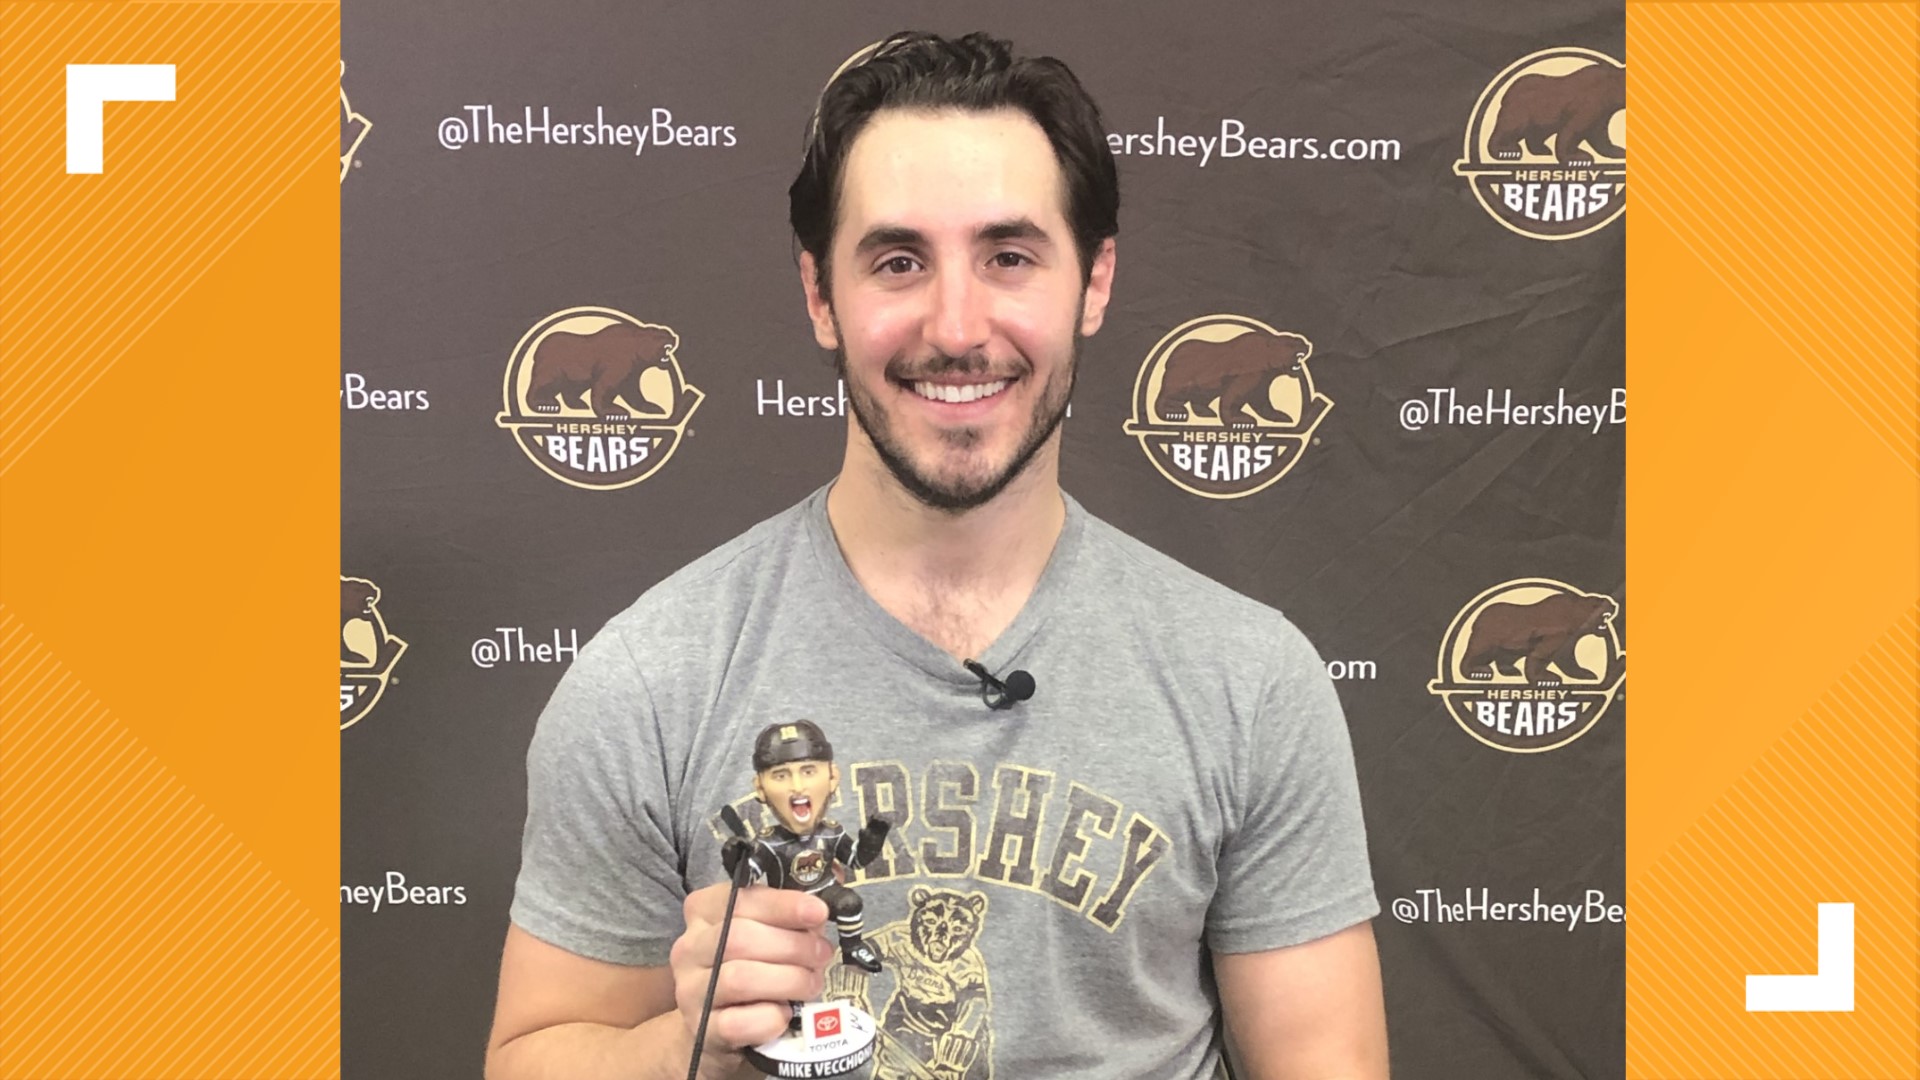 He scored the Calder Cup-winning overtime goal for the Hershey Bears and struck a pose after scoring a goal that is now going to be immortalized.